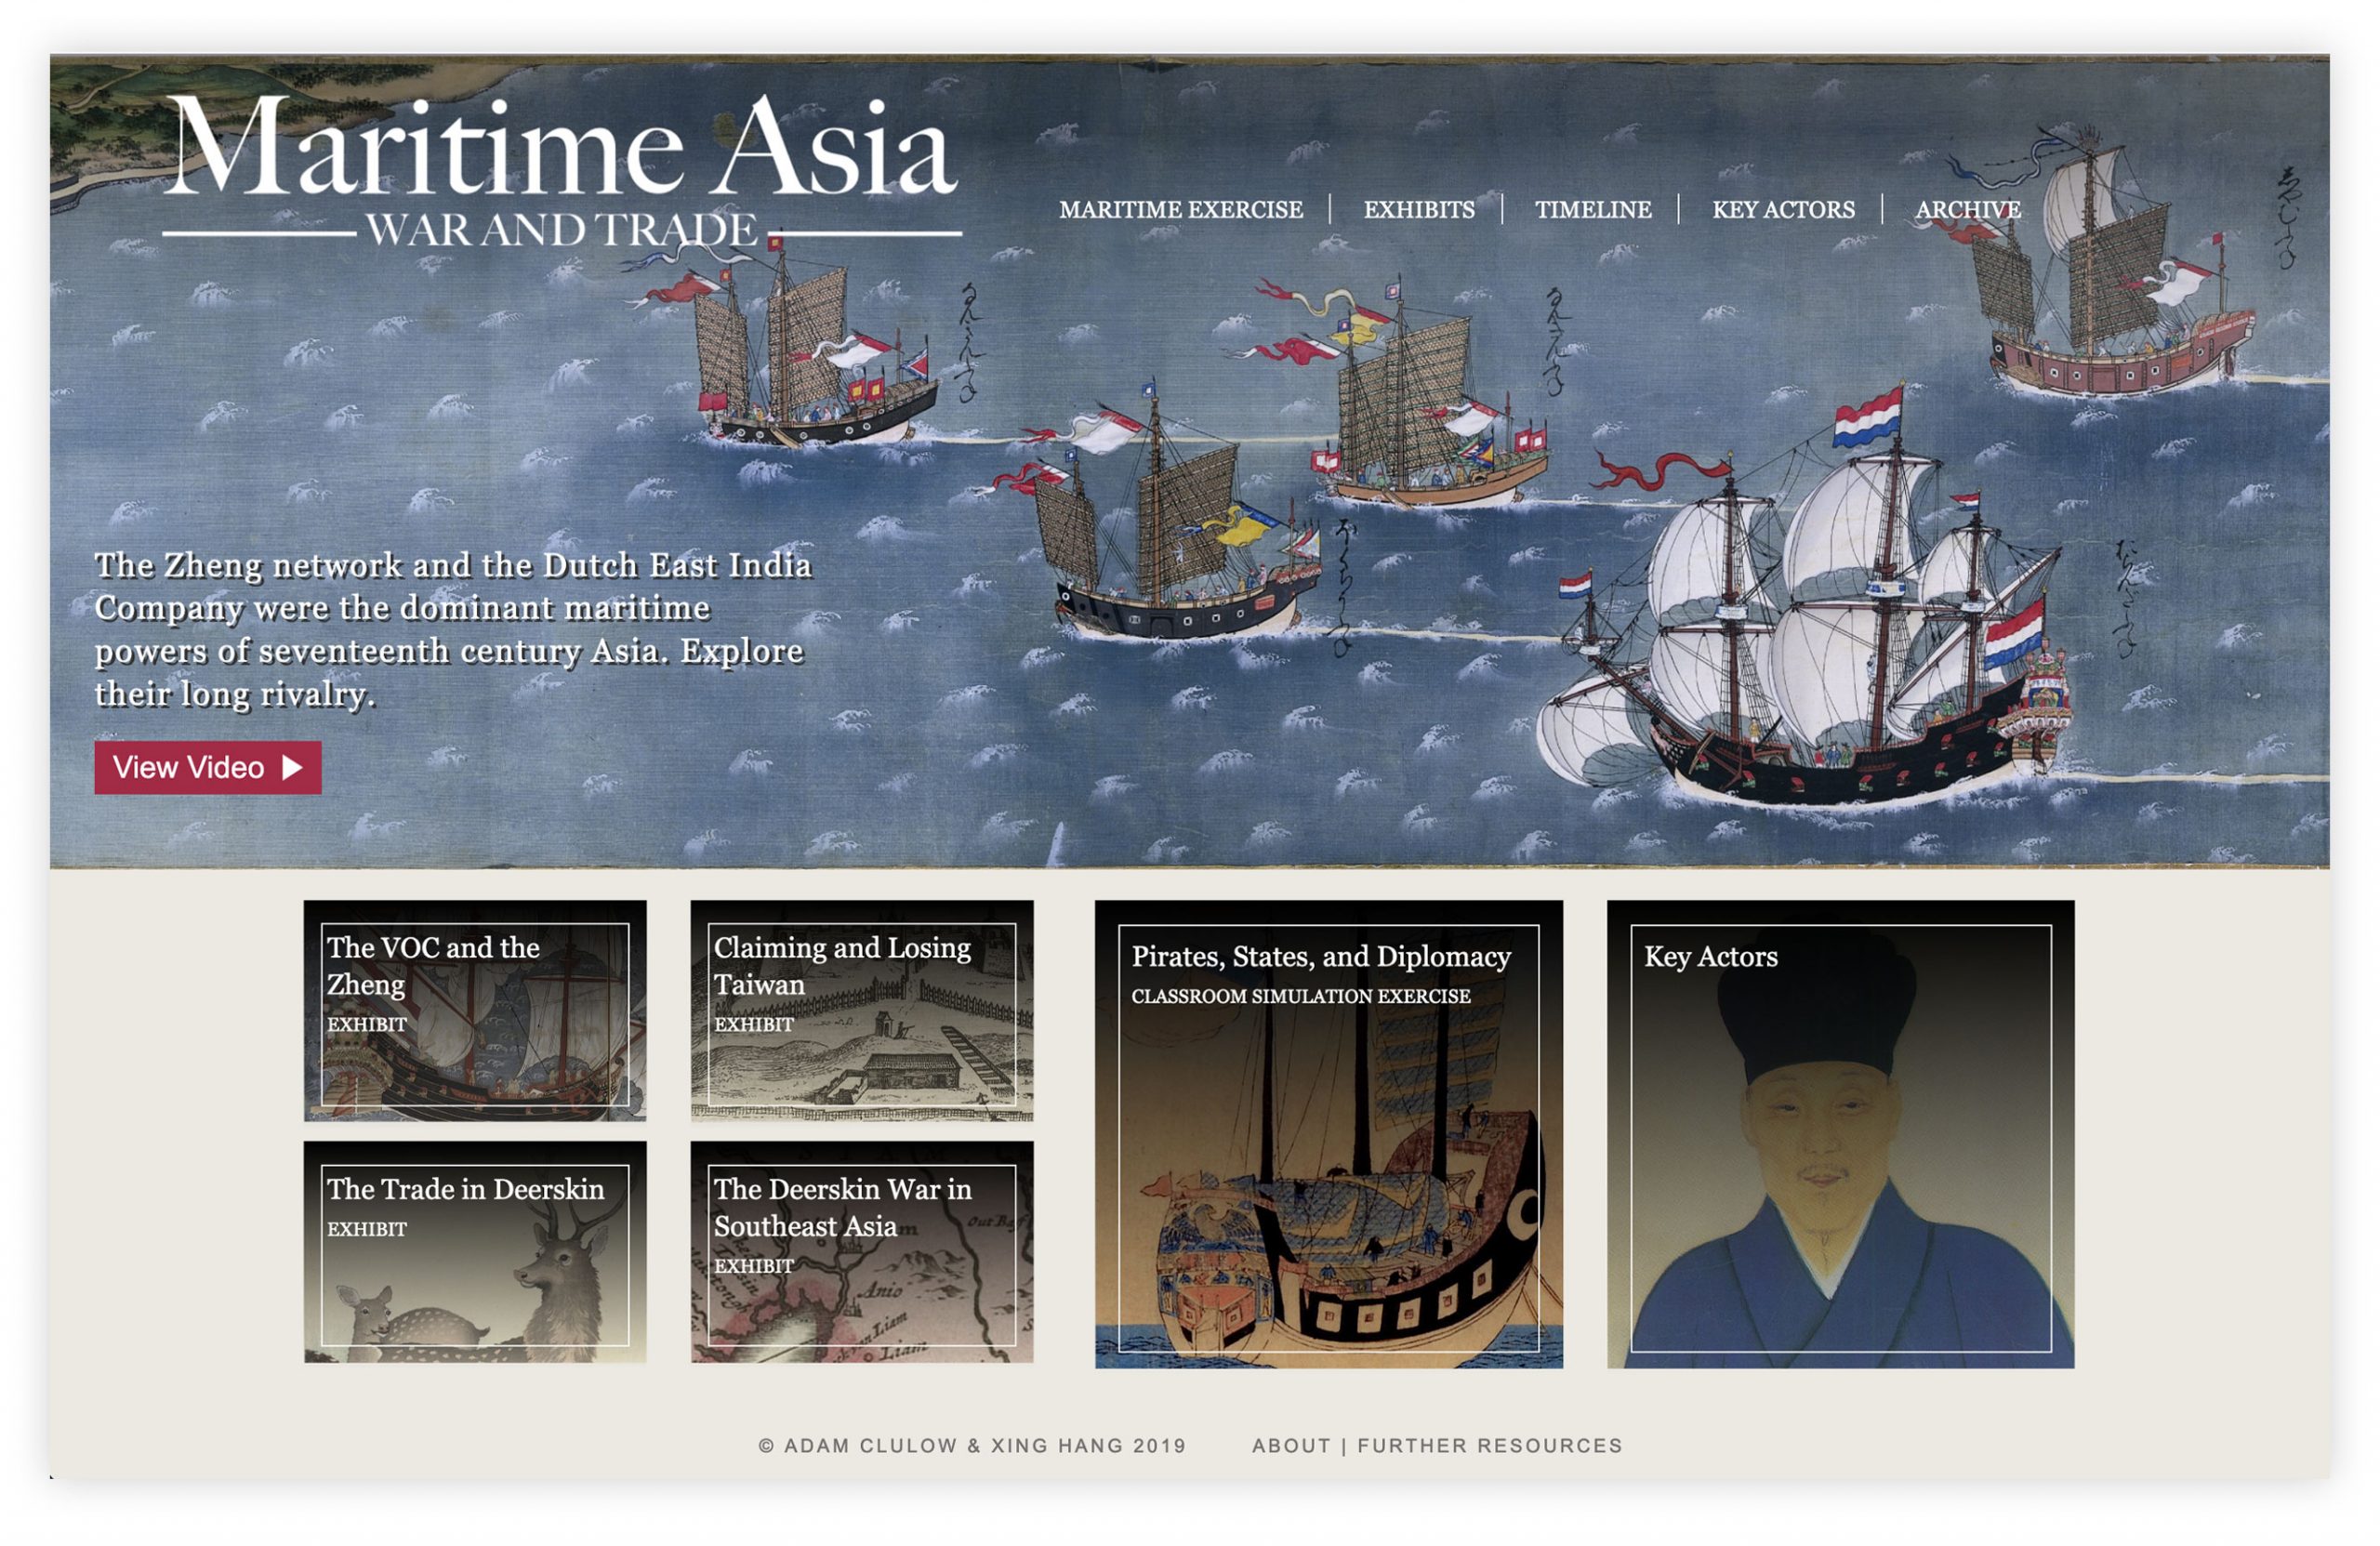 Screengrab of the Maritime Asia website home page.